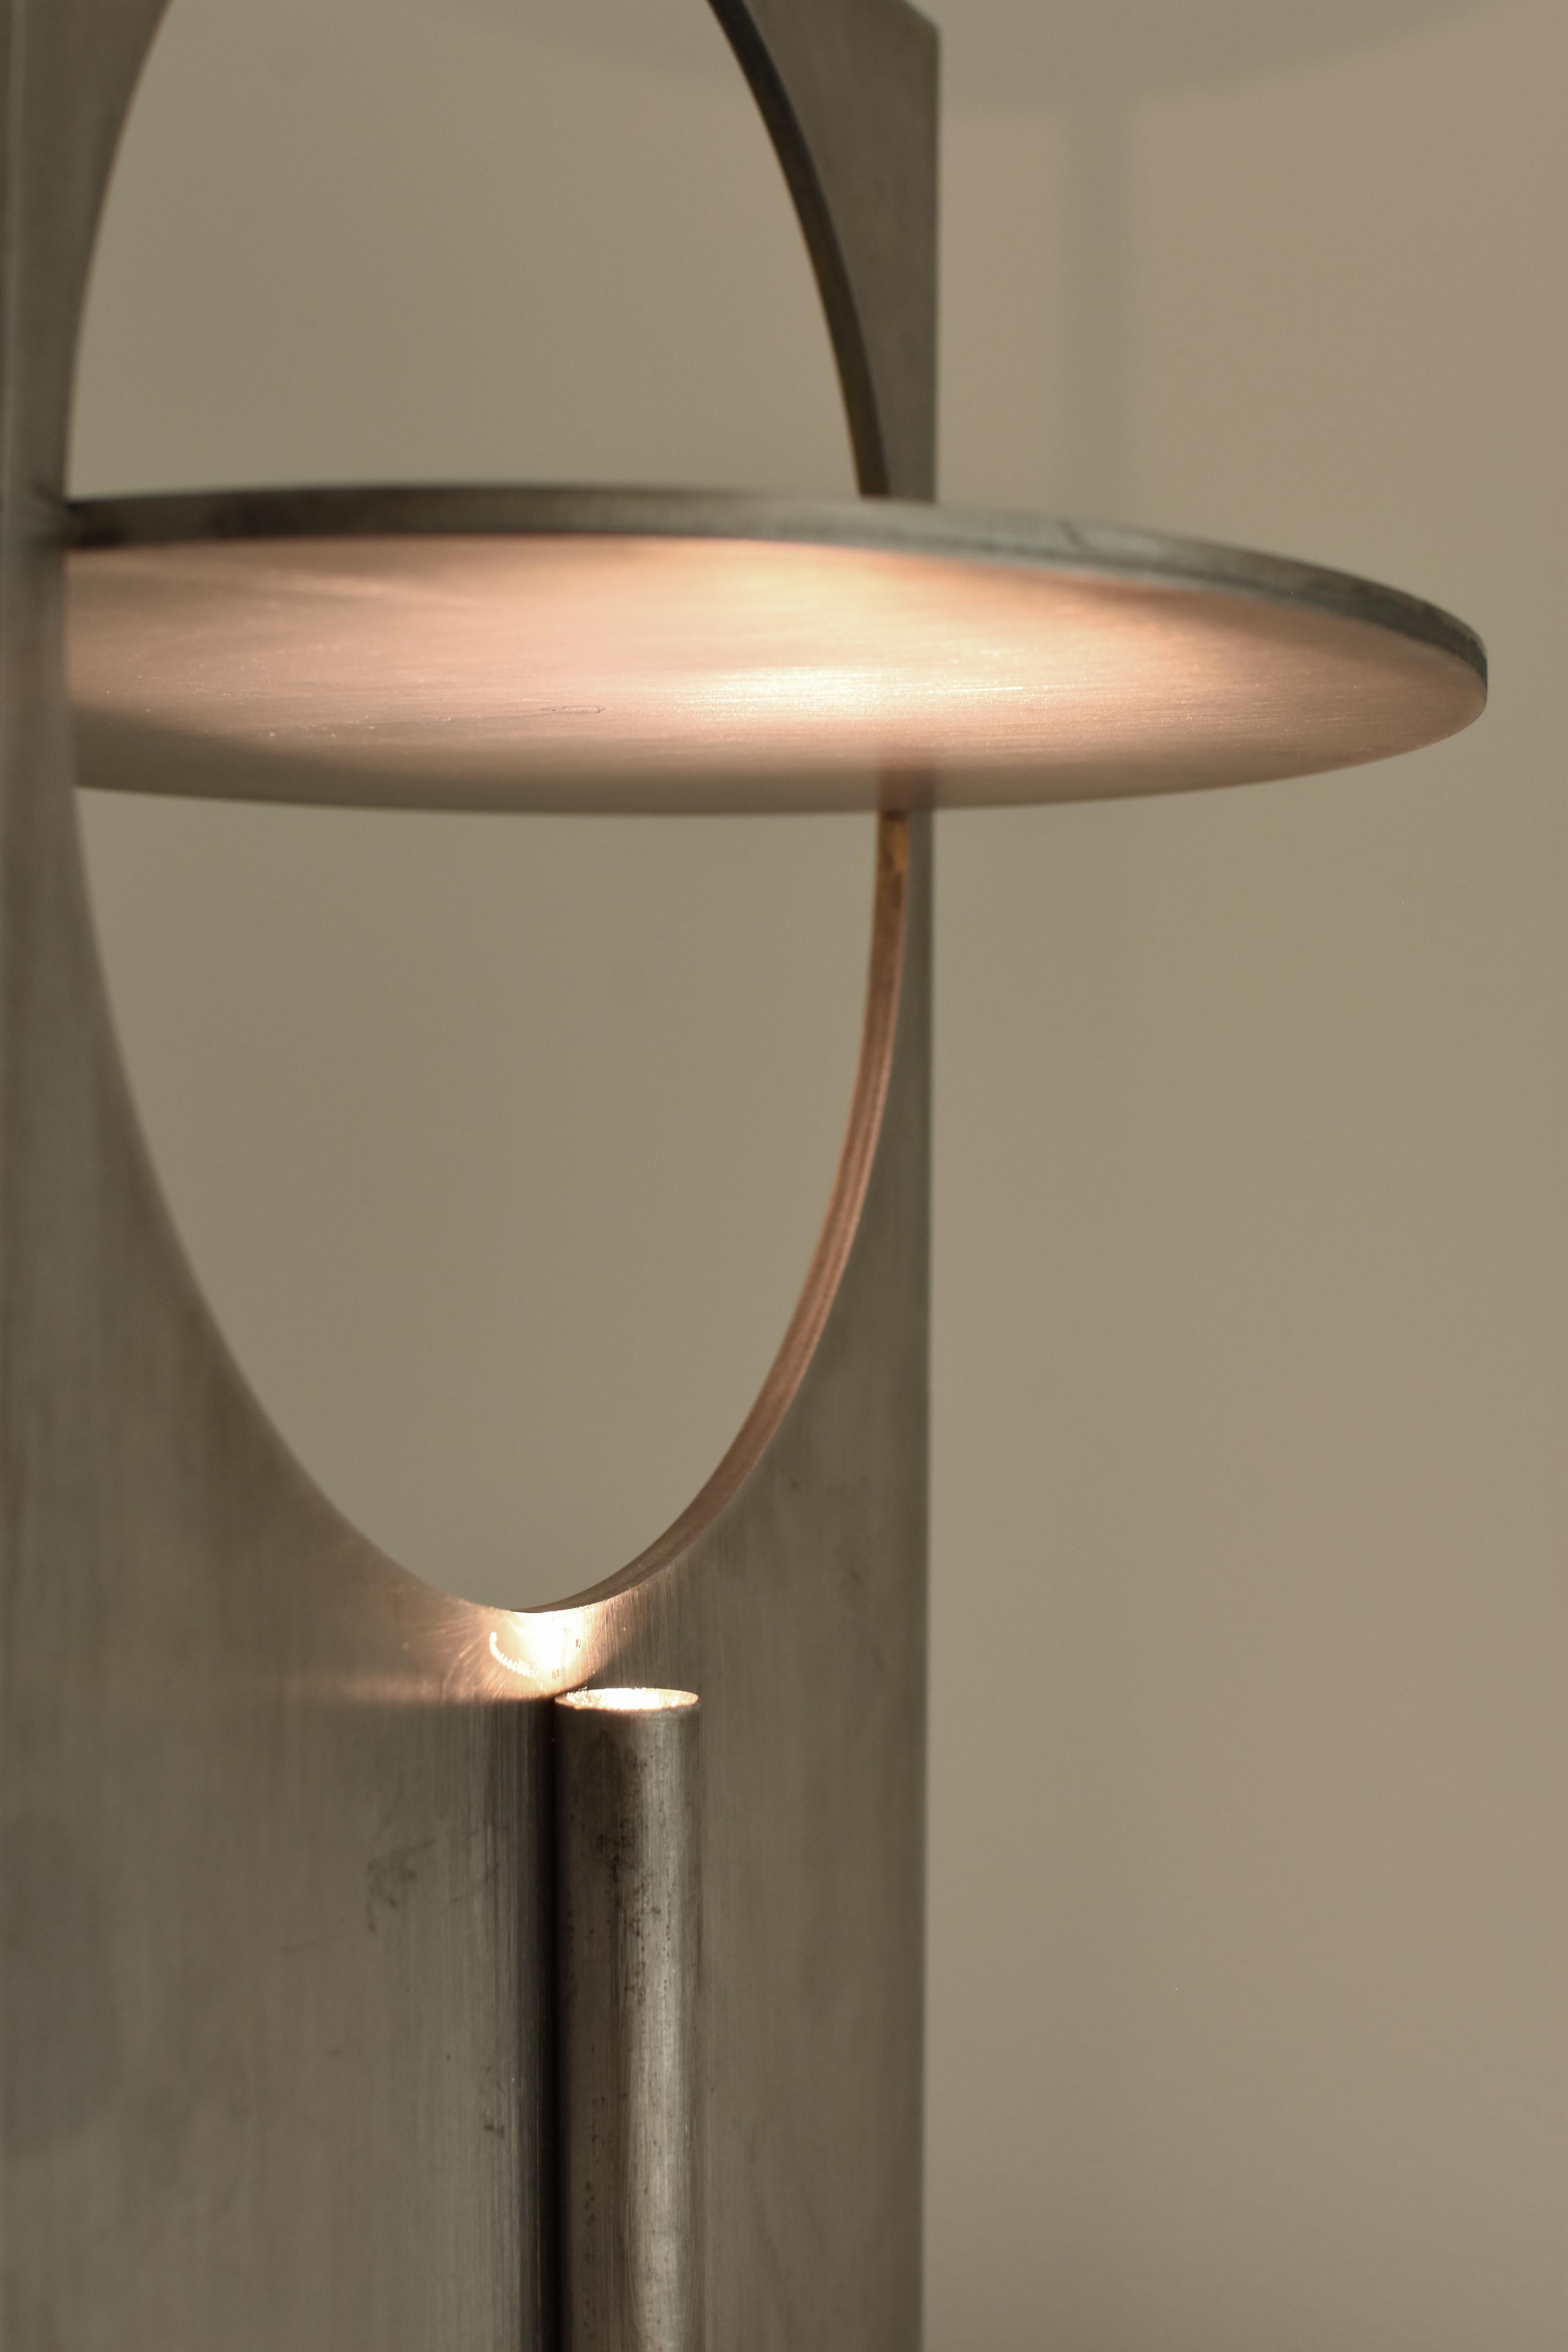 Mexican OBJ-01 Stainless Steel Table Lamp by Manu Bano